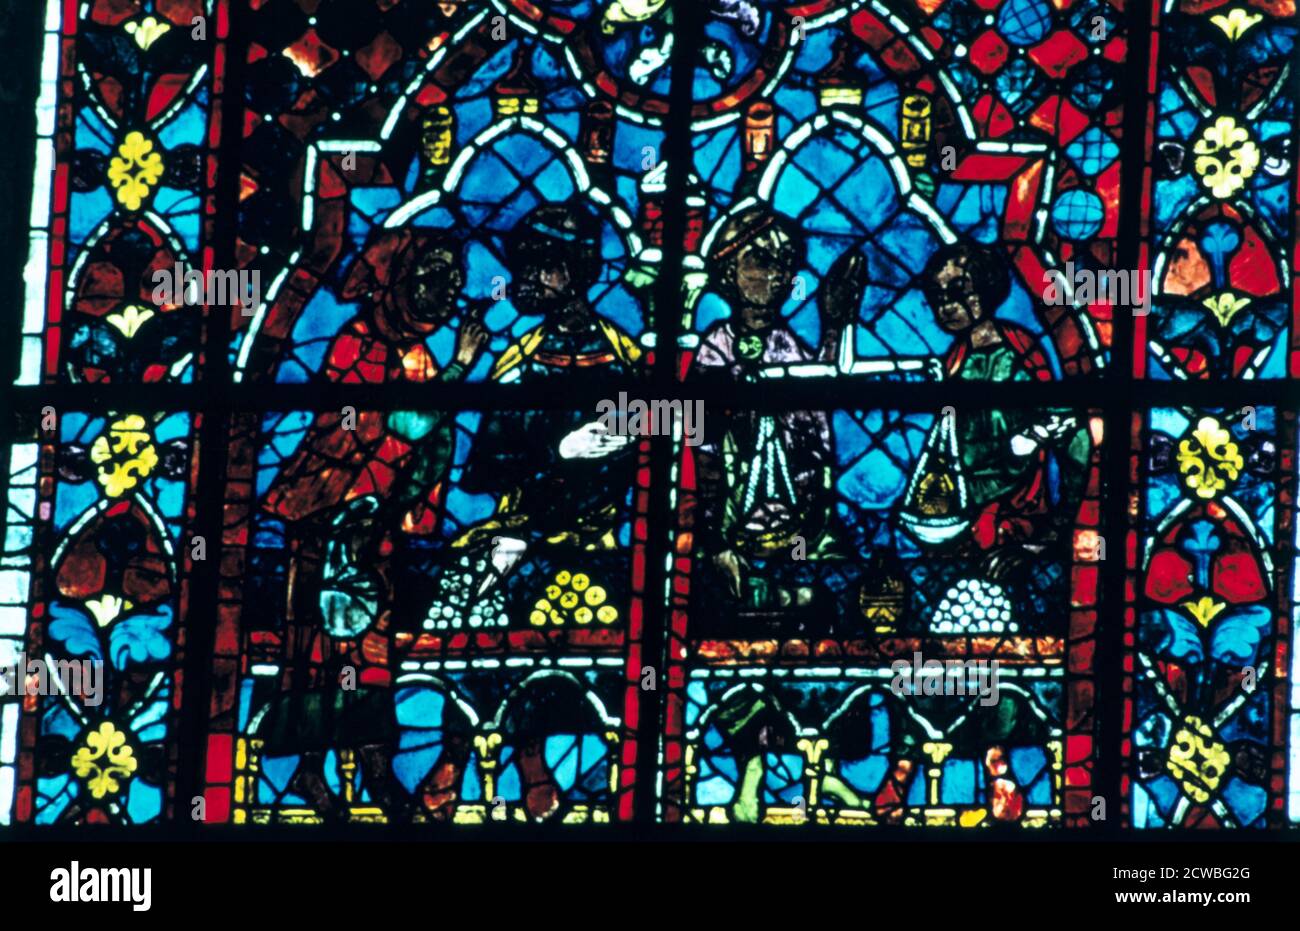 Money Changers, Stained glass, Chartres Cathedral, Chartres, France. Stock Photo